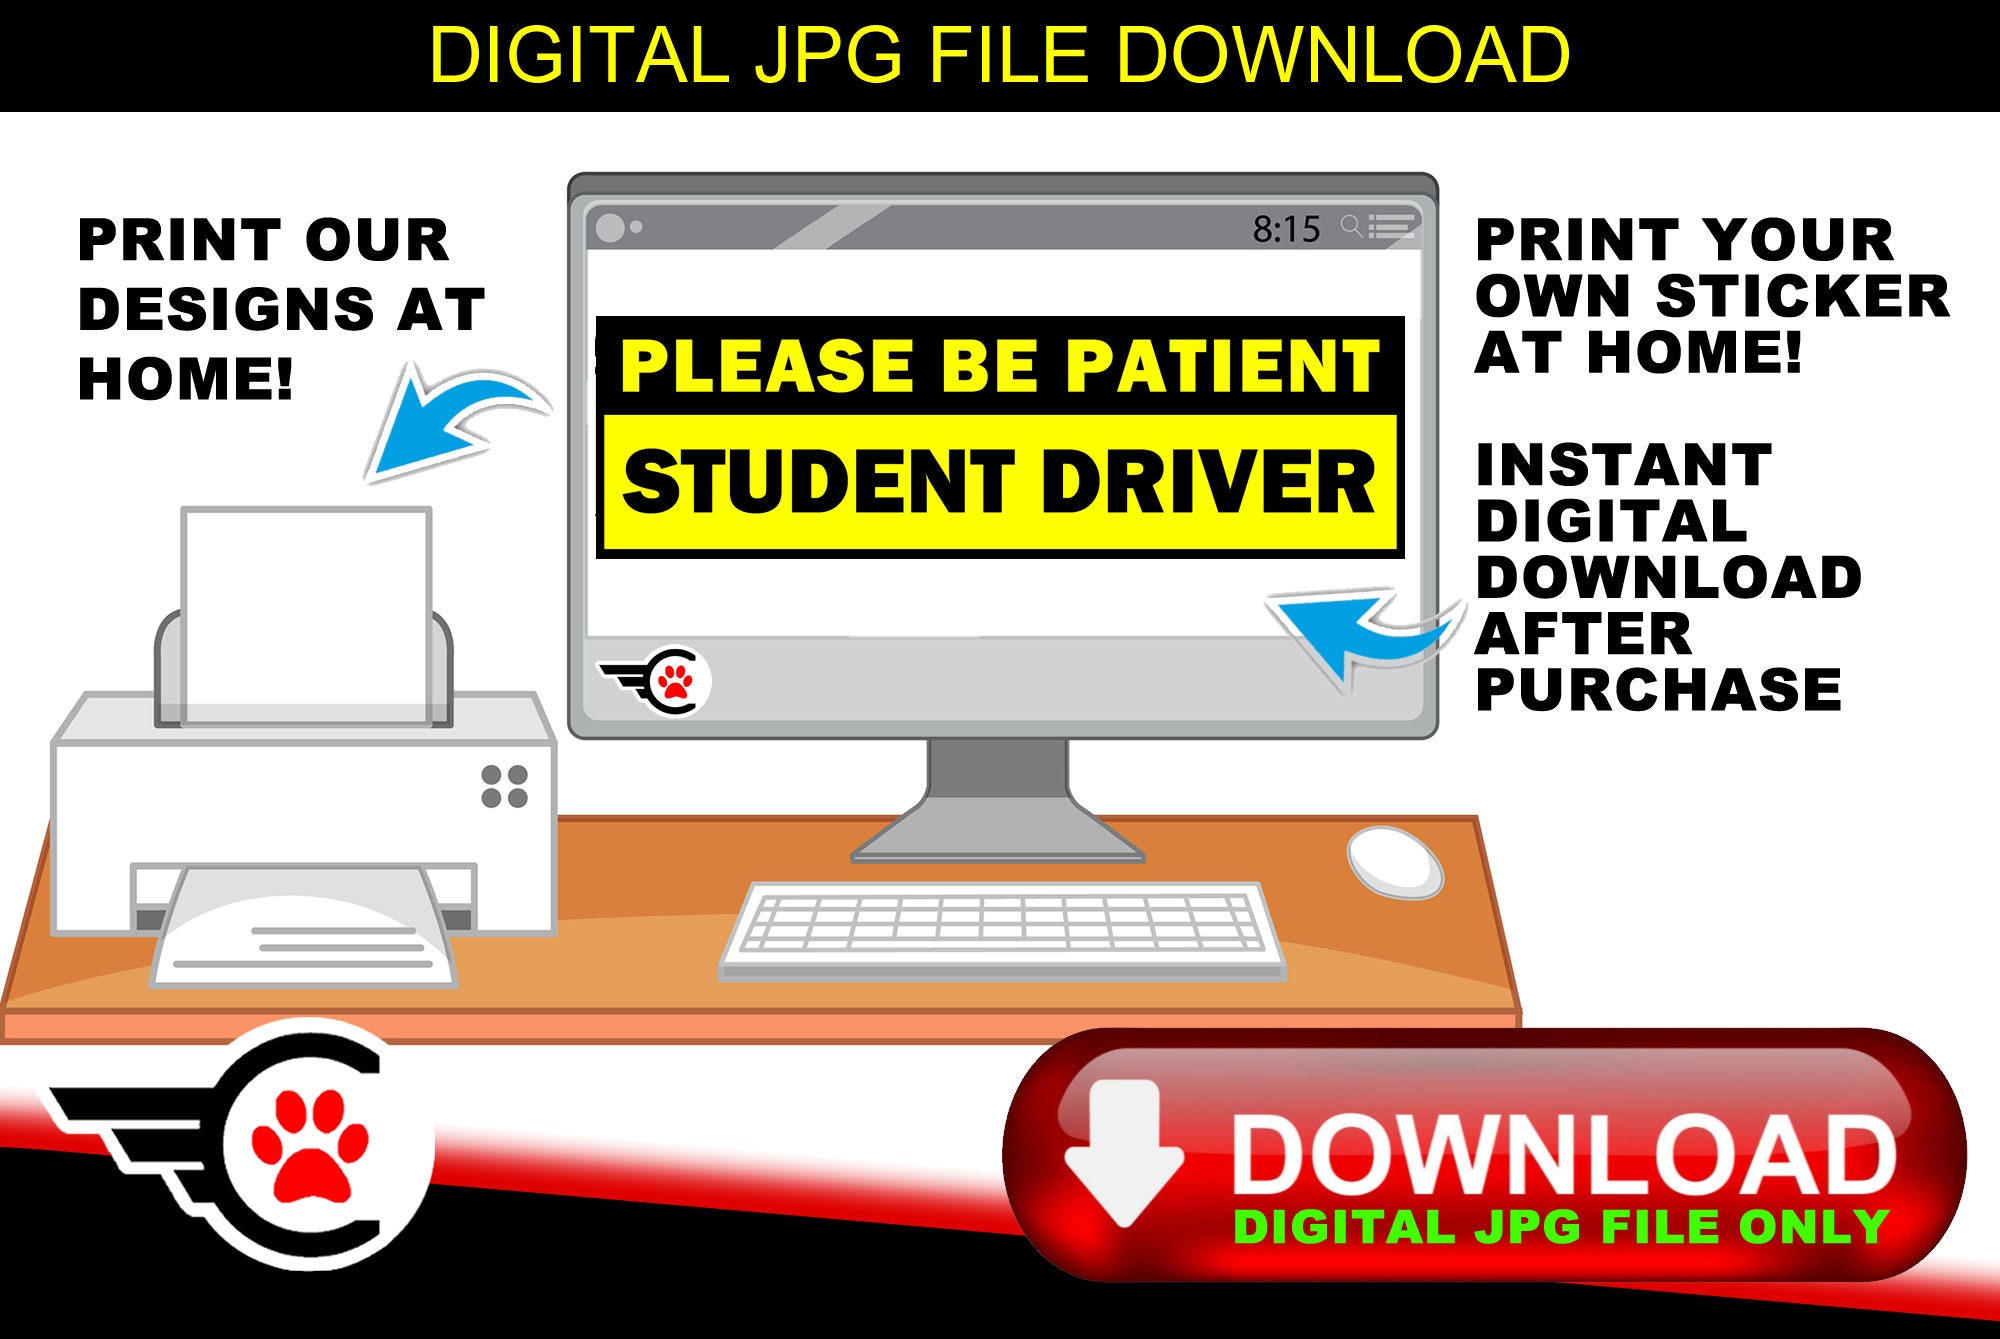 Student Driver Please Be Patient Digital Download Only Of Our Print Ready JPG File For Do It Yourself Print Your Own Stickers At Home